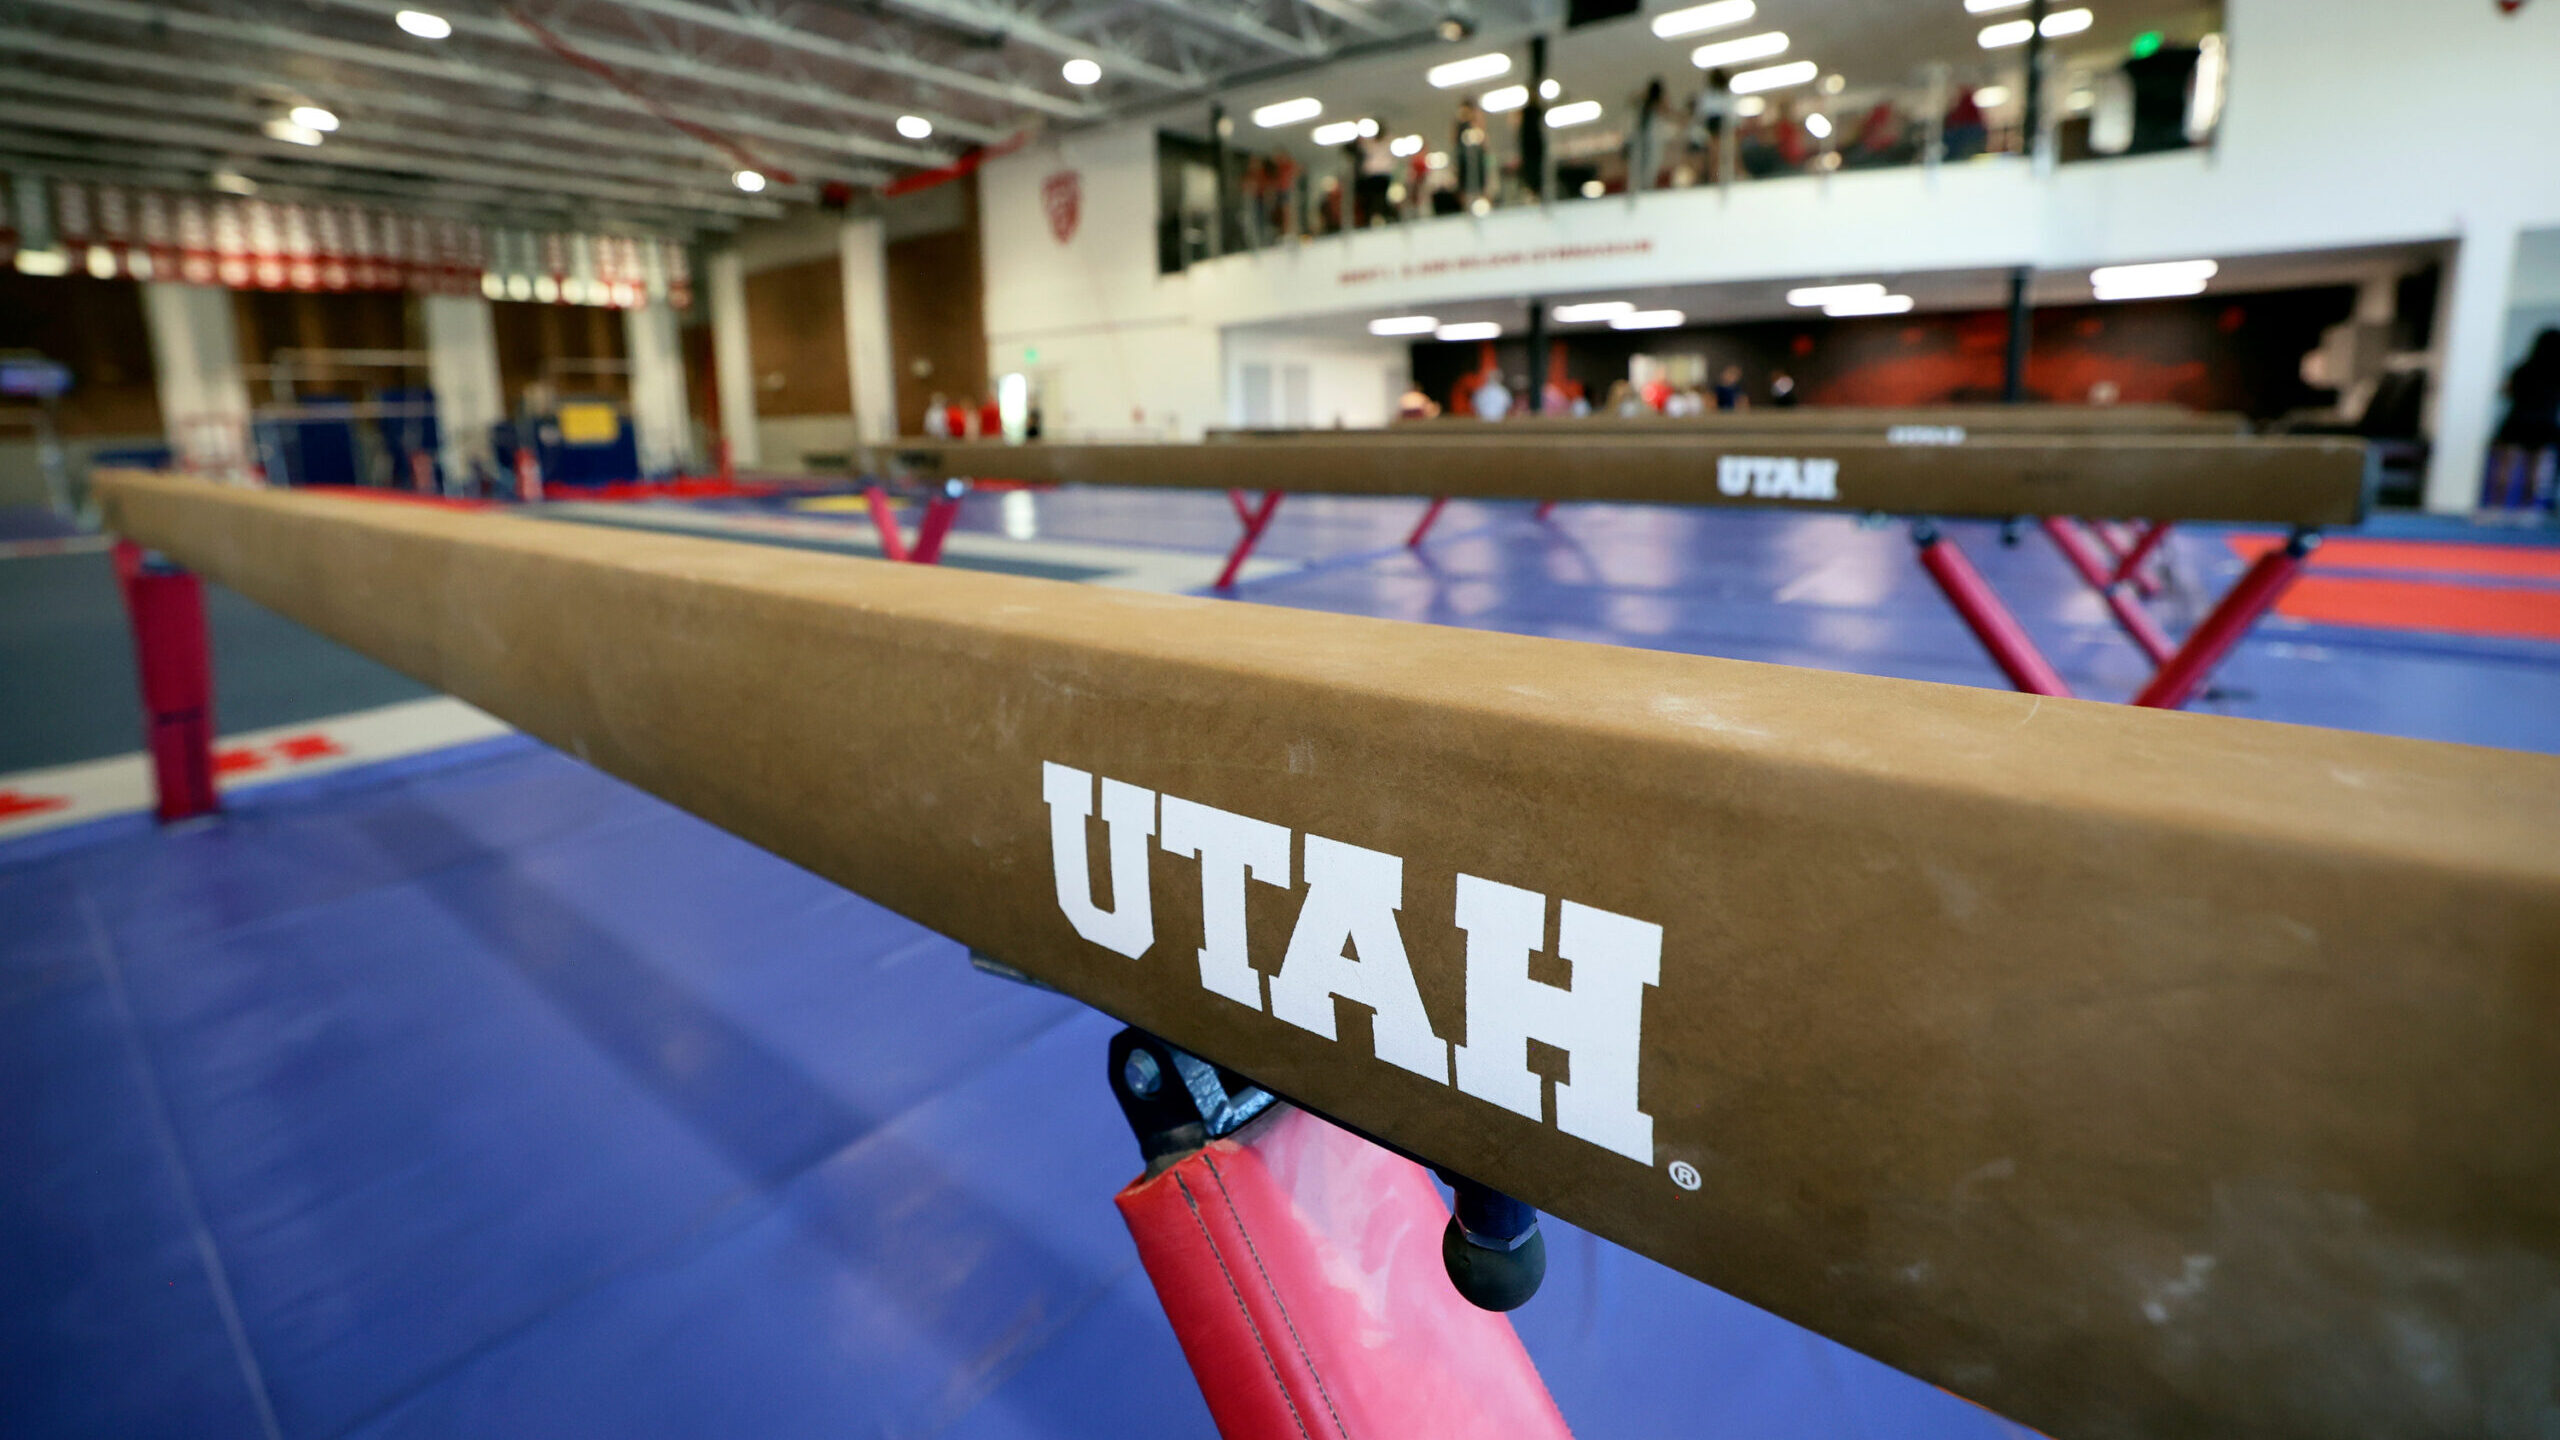 Kara Eaker posted on Instagram today that she will retire from Utah Gymnastics after enduring two y...